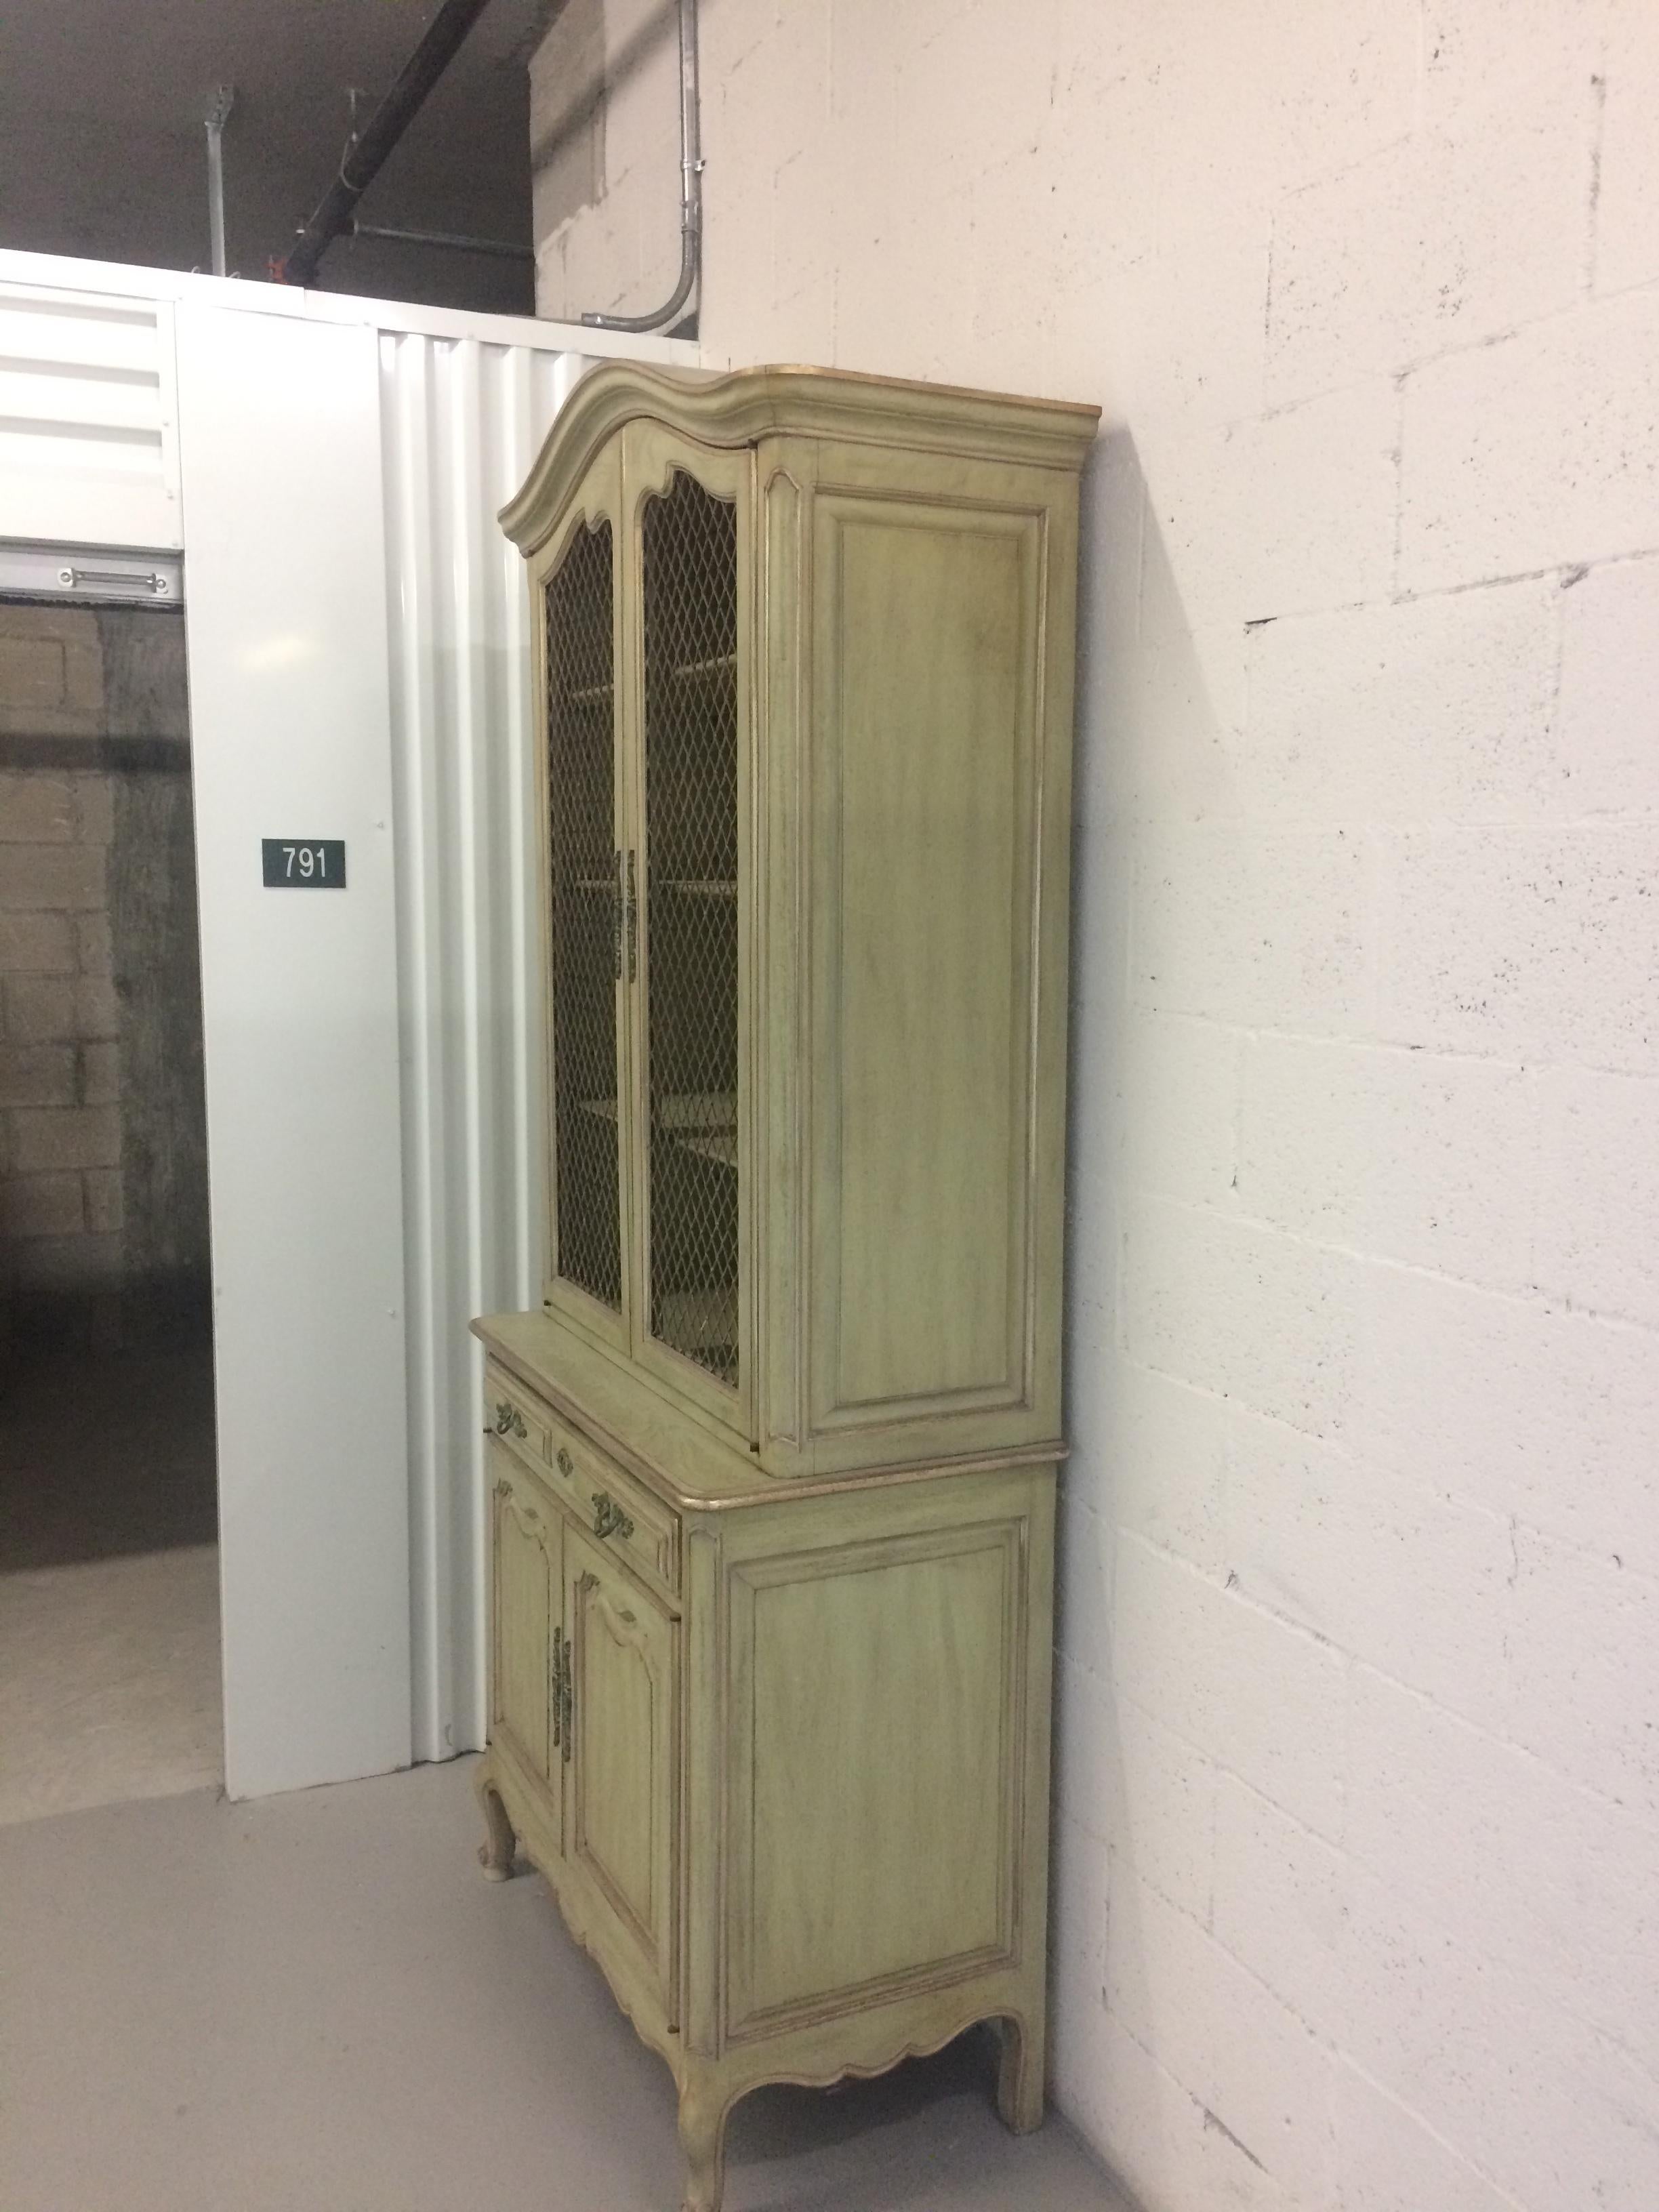 French provincial style 3-drawer step-back cupboard. Drawers below with open mesh doors above with illuminated shelves. Has the original pickled green paint with silver high lights in very good condition. Most of the old world Palm Beach mansions